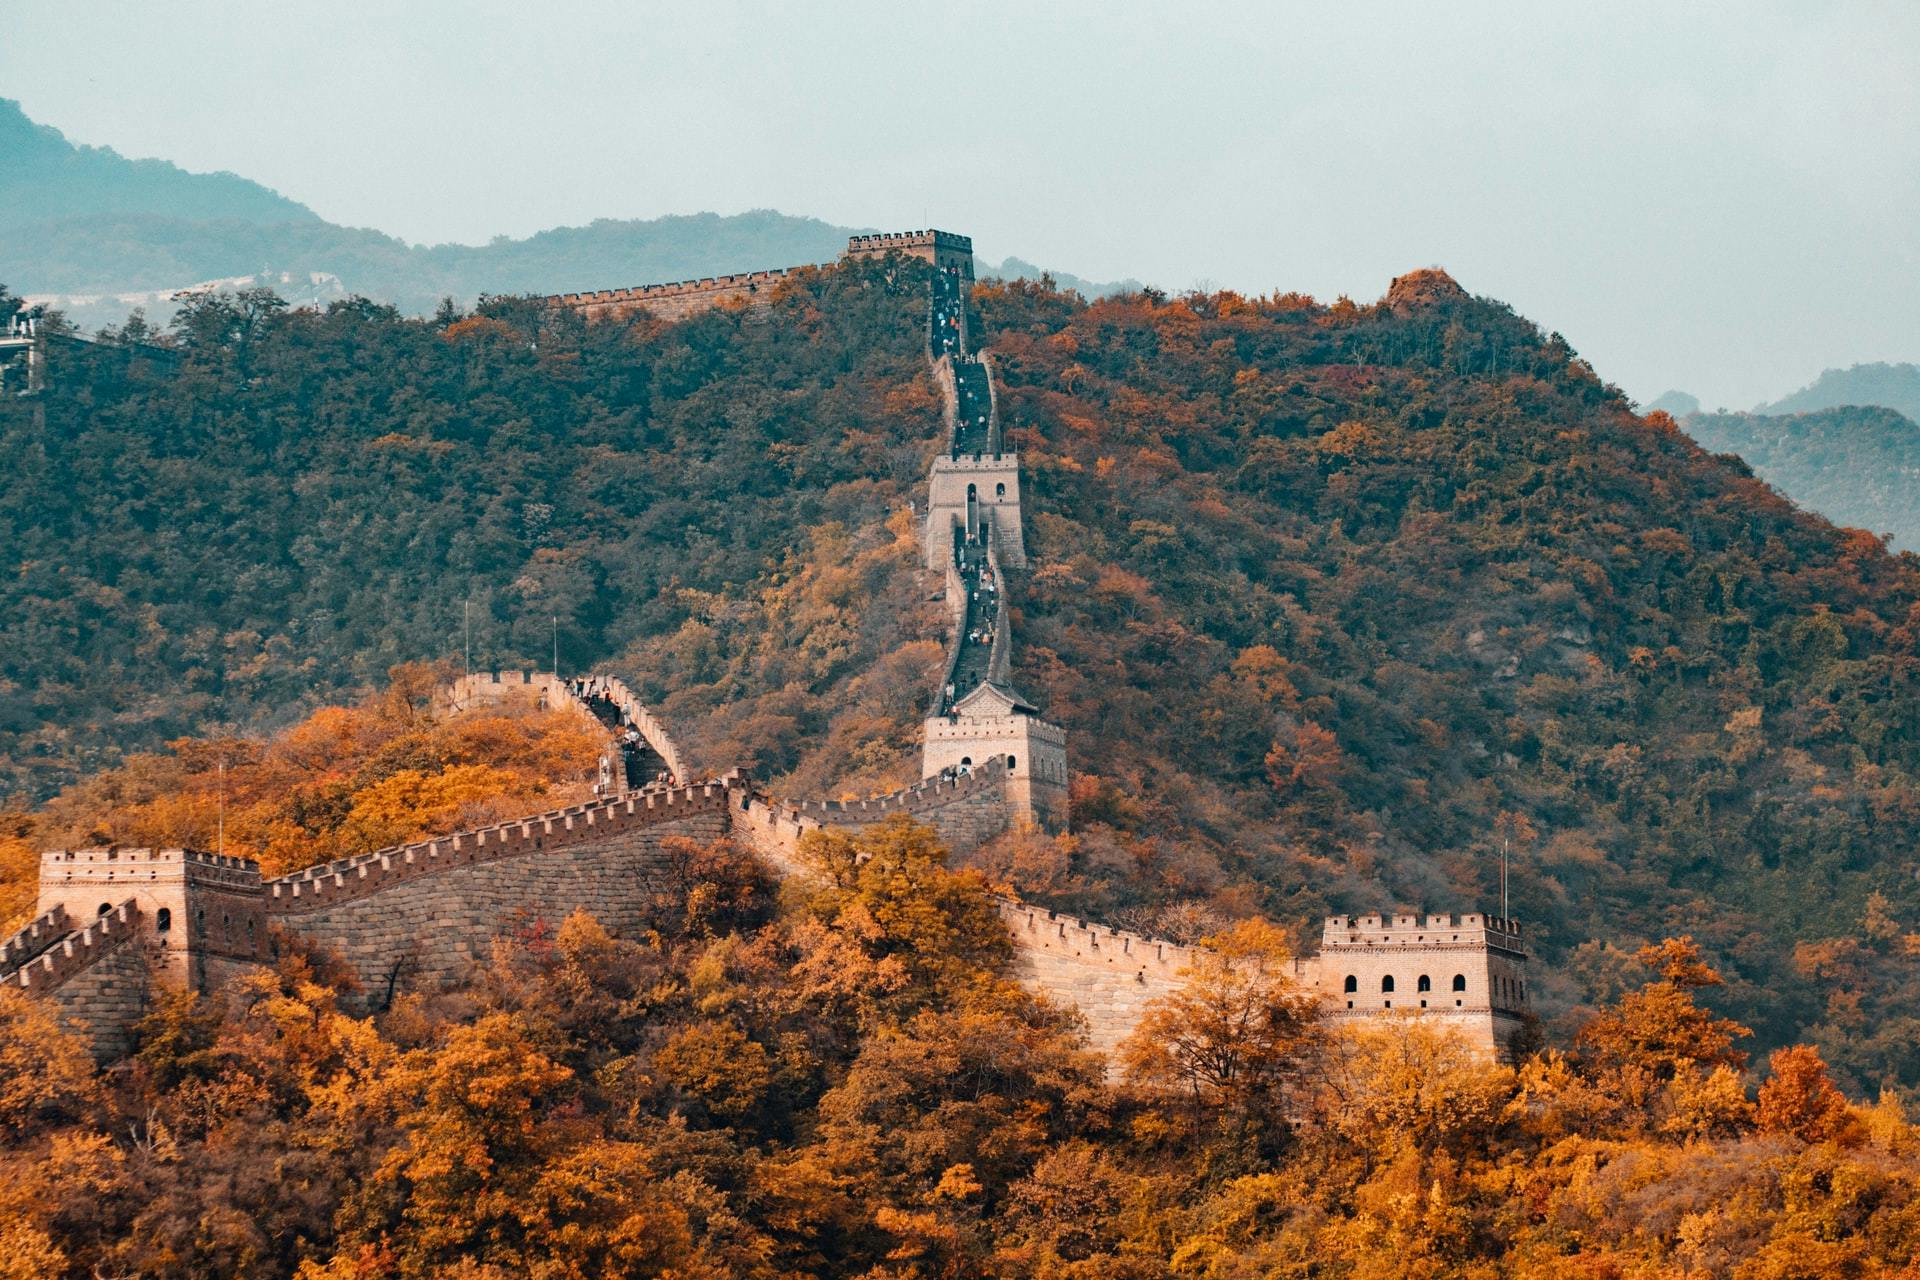 The Great Wall of China in the fall.